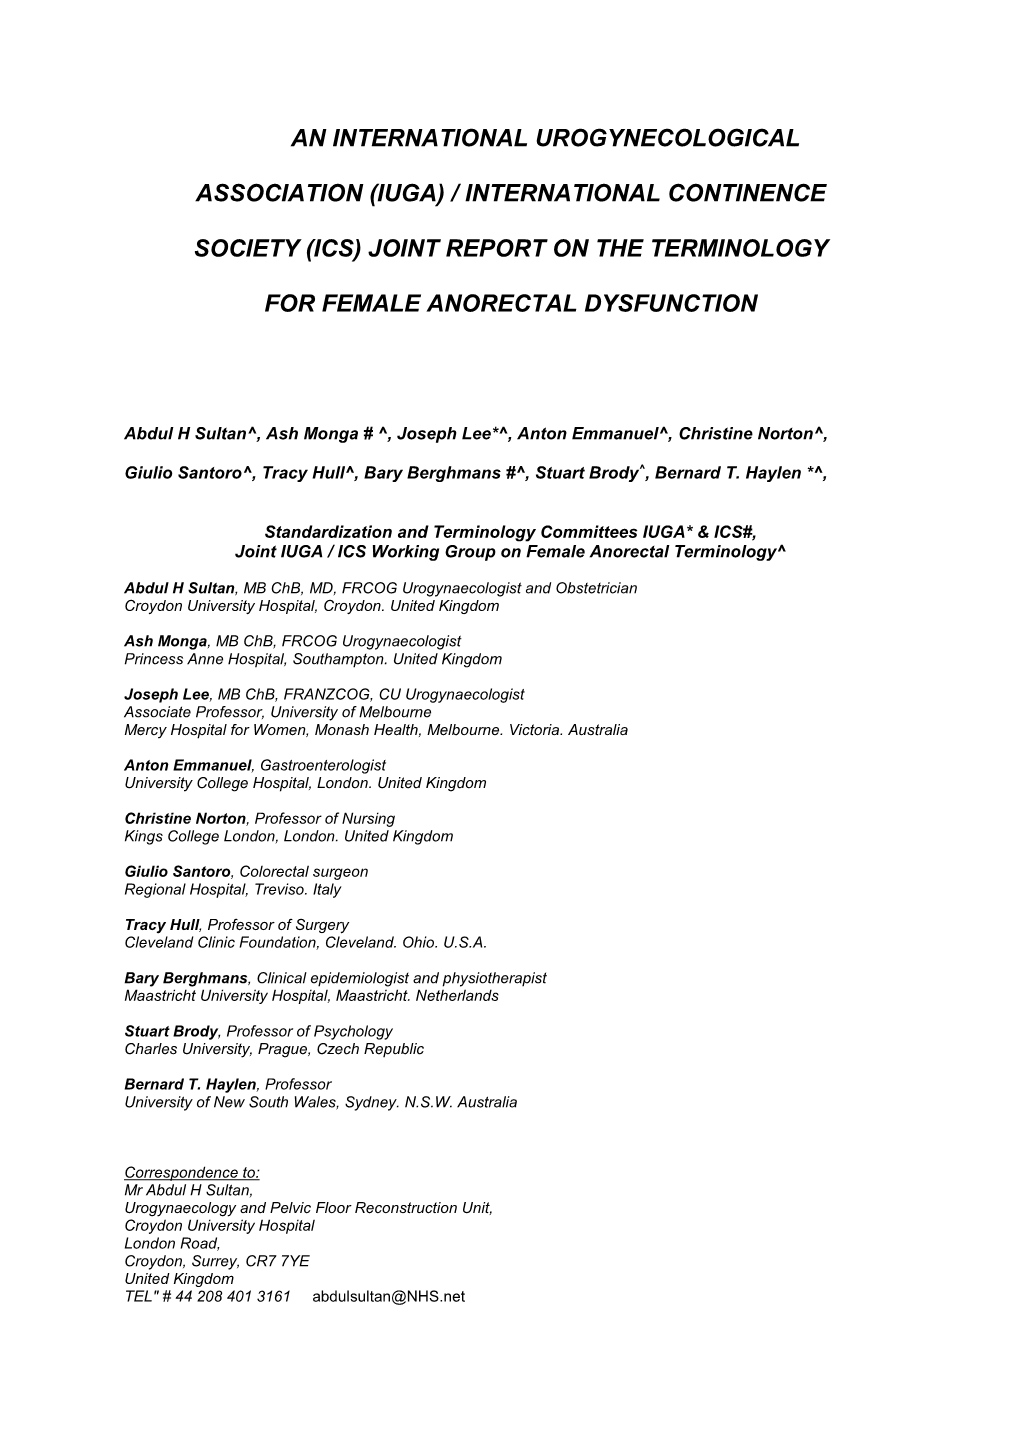 Joint Report on the Terminology